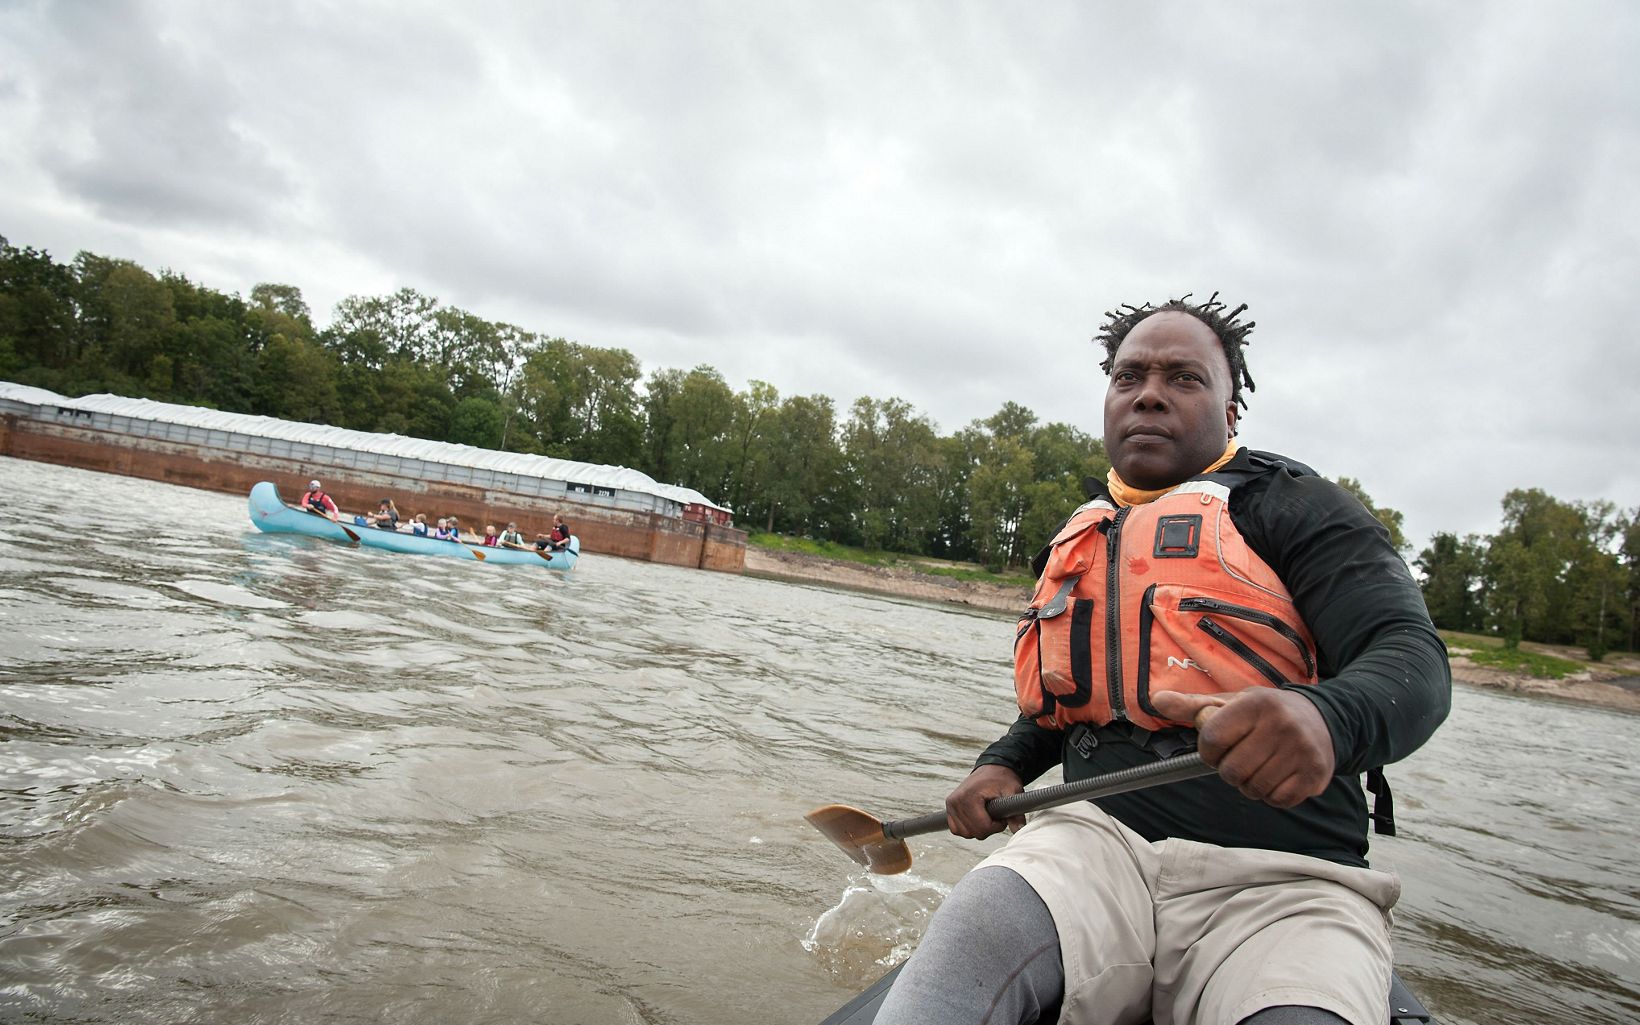 A man paddles his boat in murky water. He is wearing a safety vest and behind him a canoe filled with people and a docked barge are visible. 